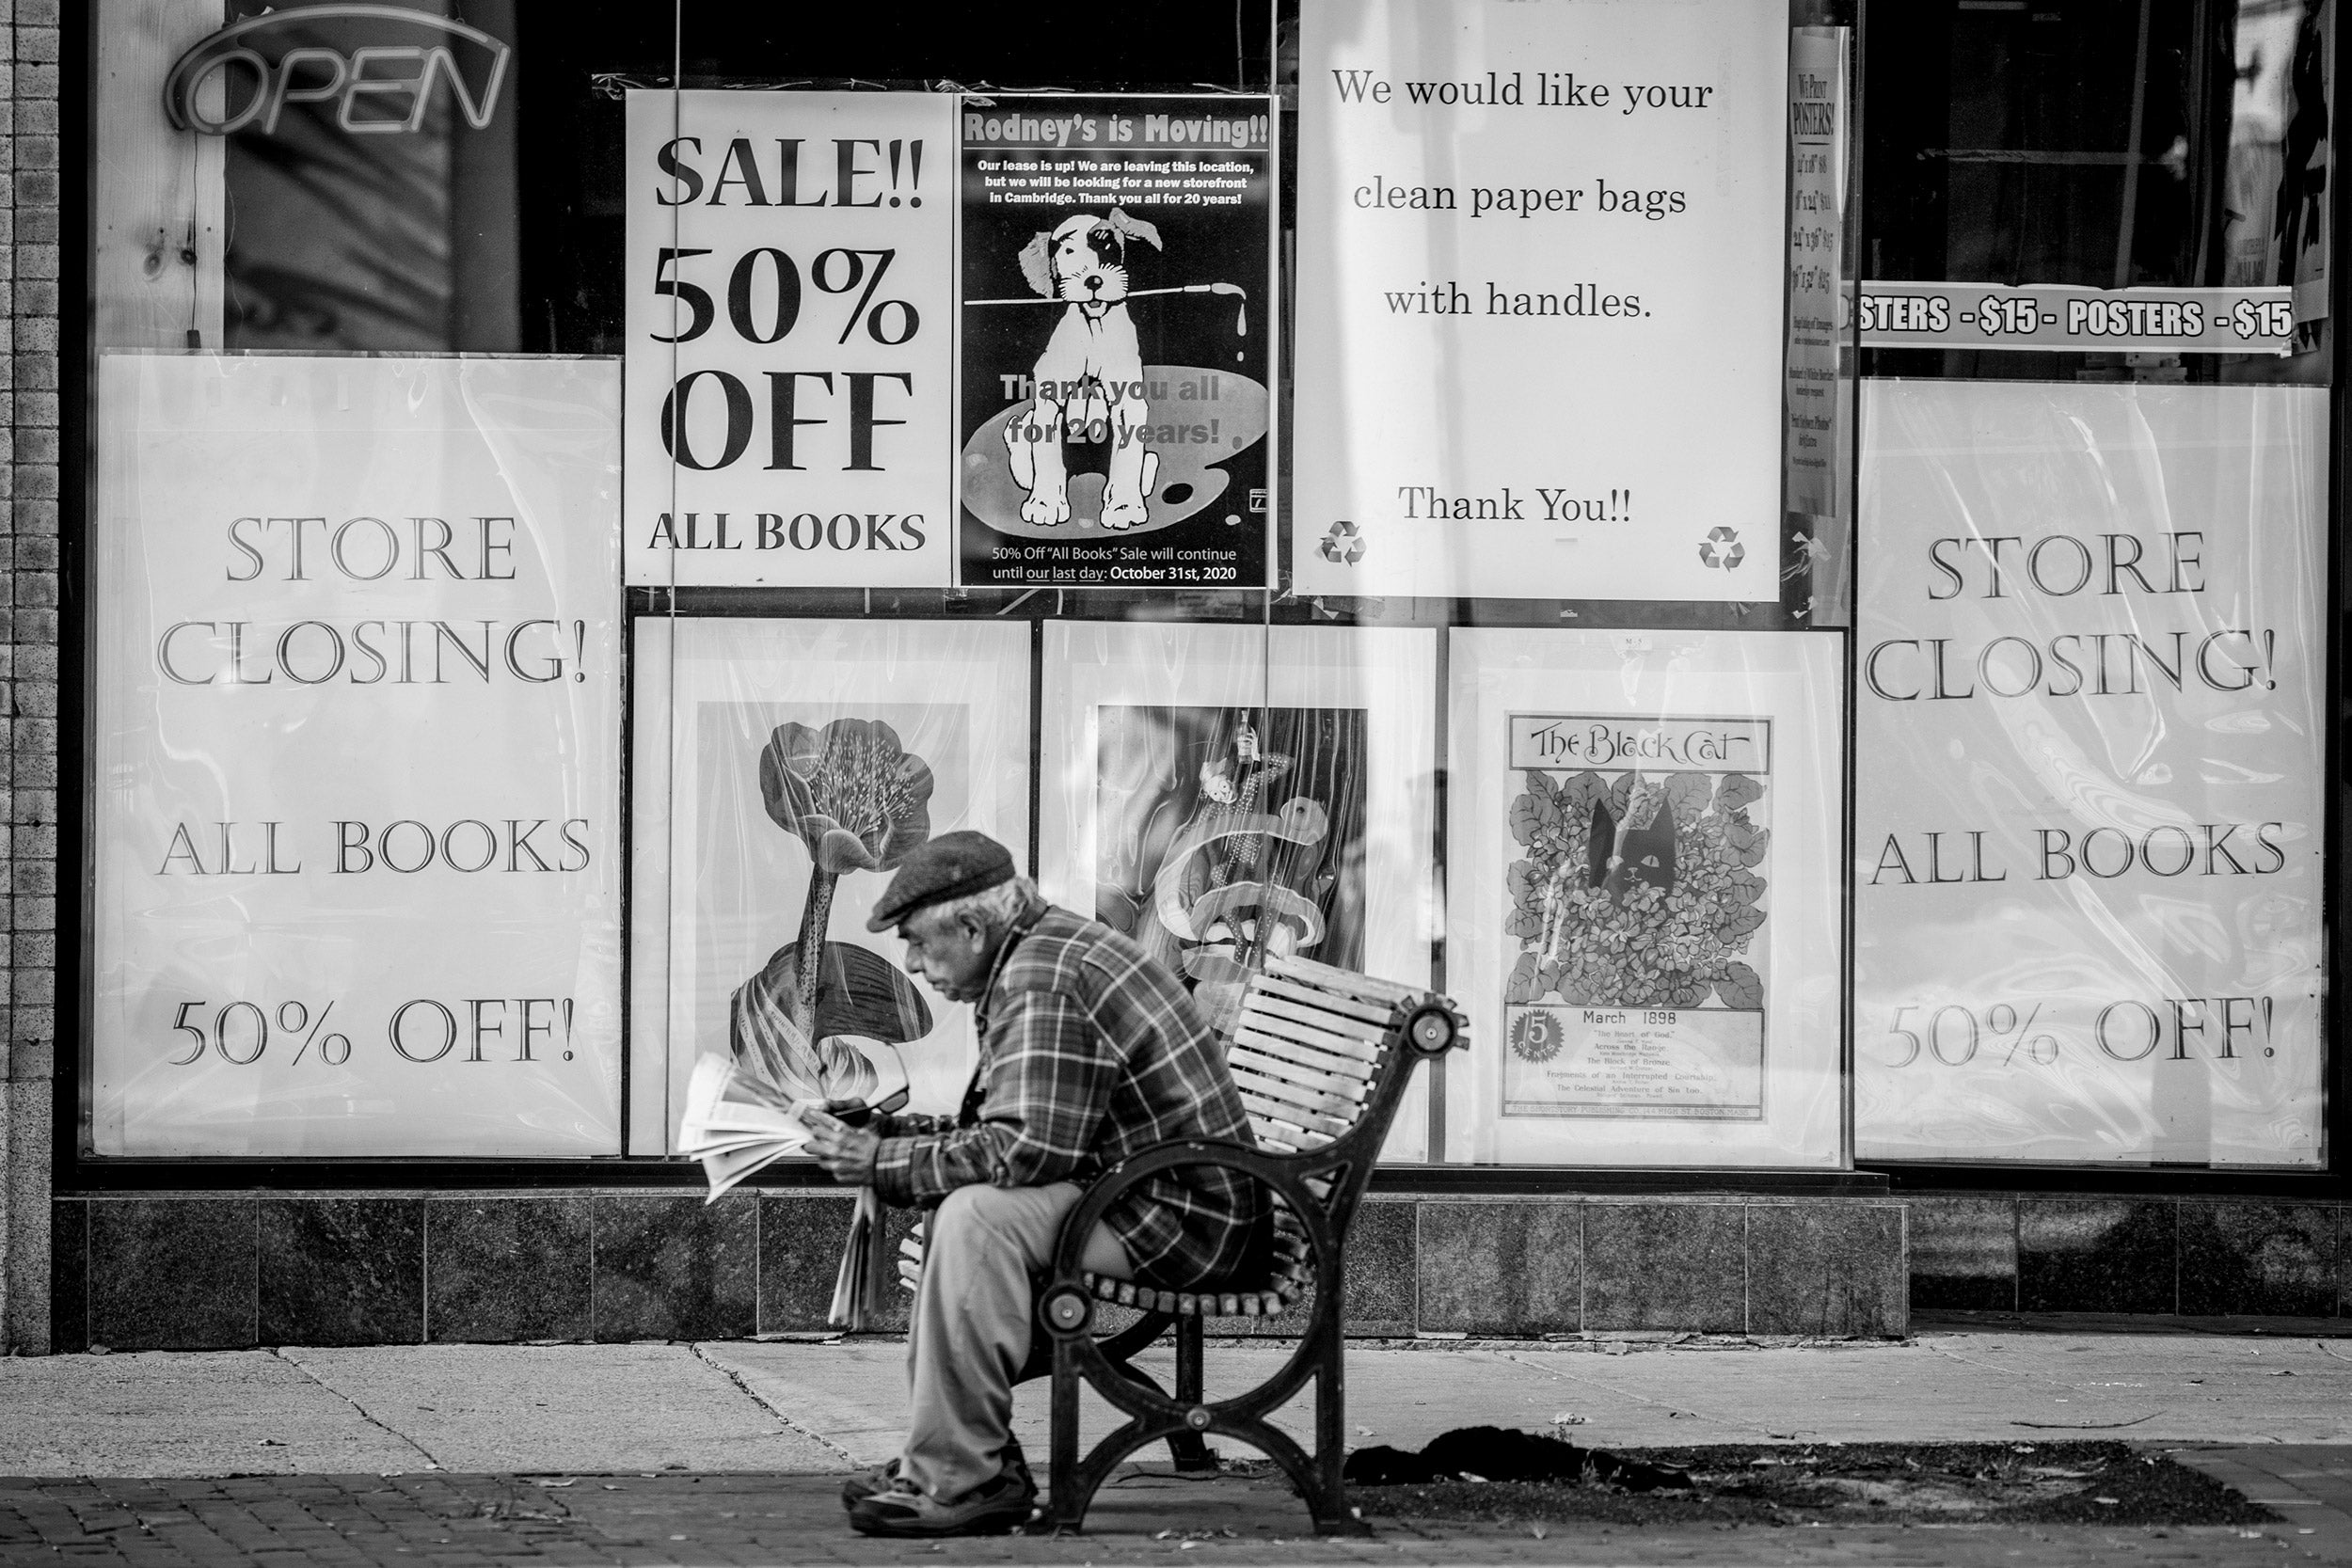 Man sitting on bench in front of store that is closing.